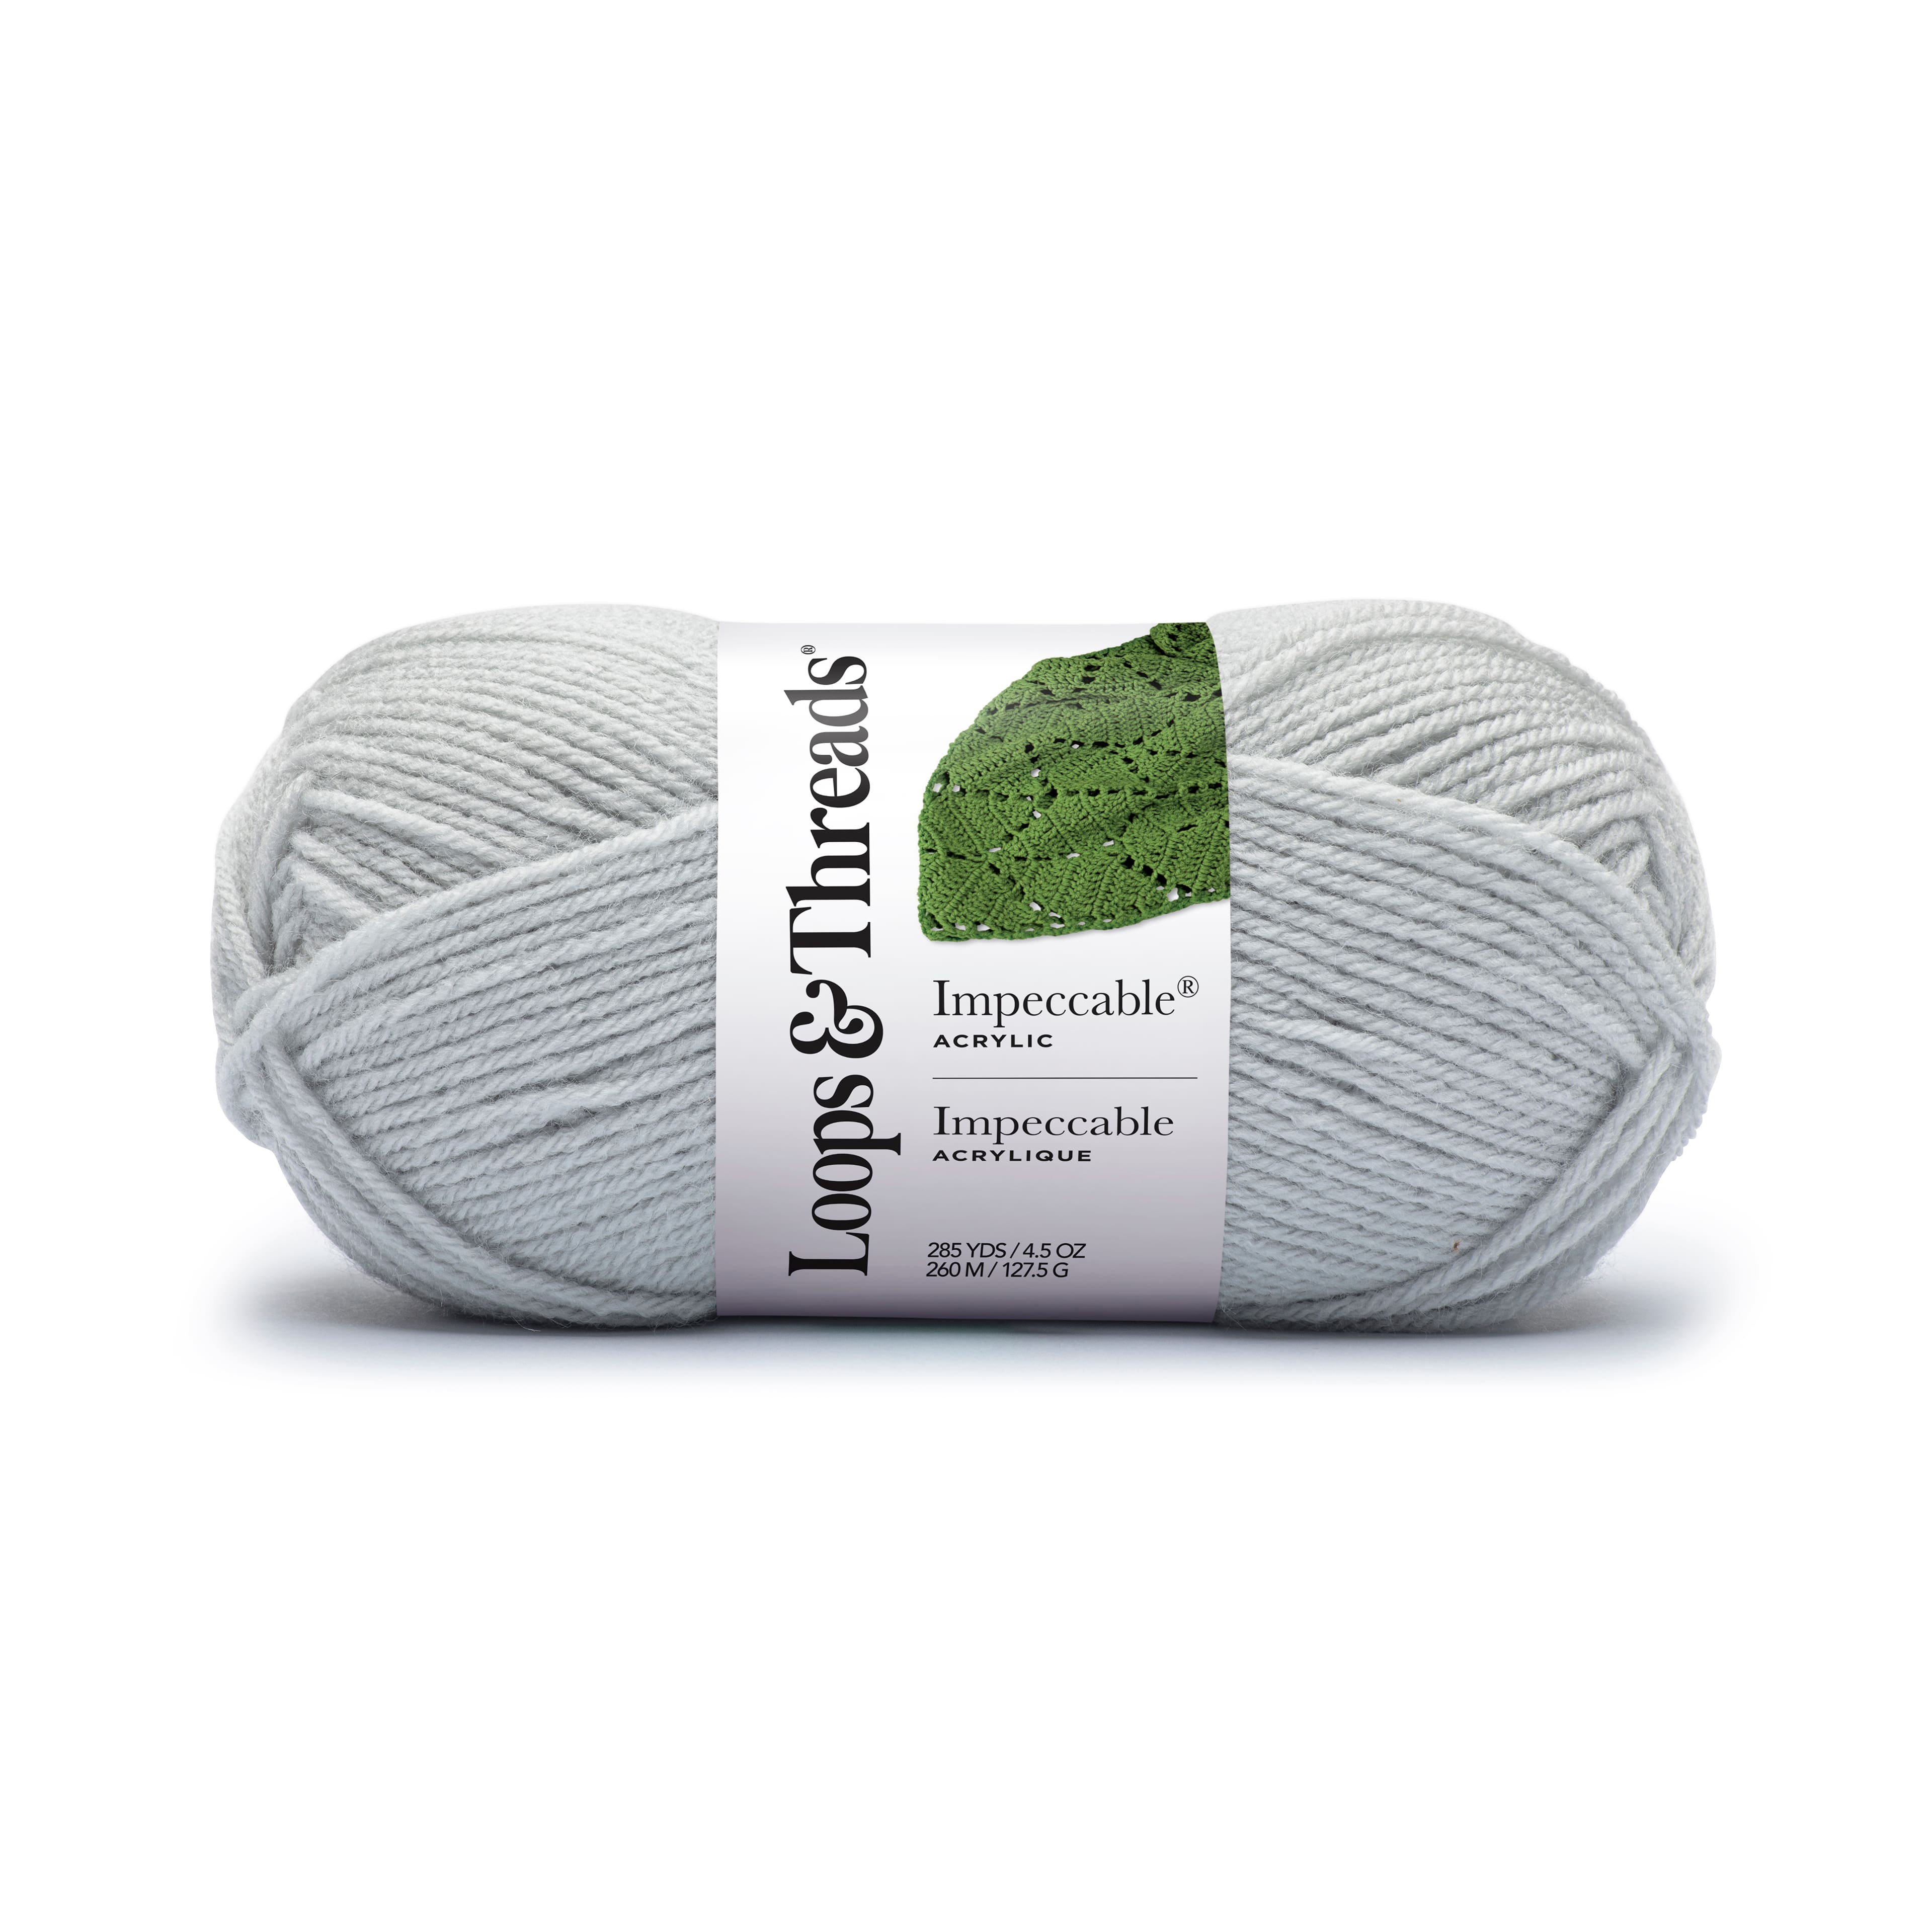 Loops & Threads Impeccable Speckle Stripes Yarn - 3 oz